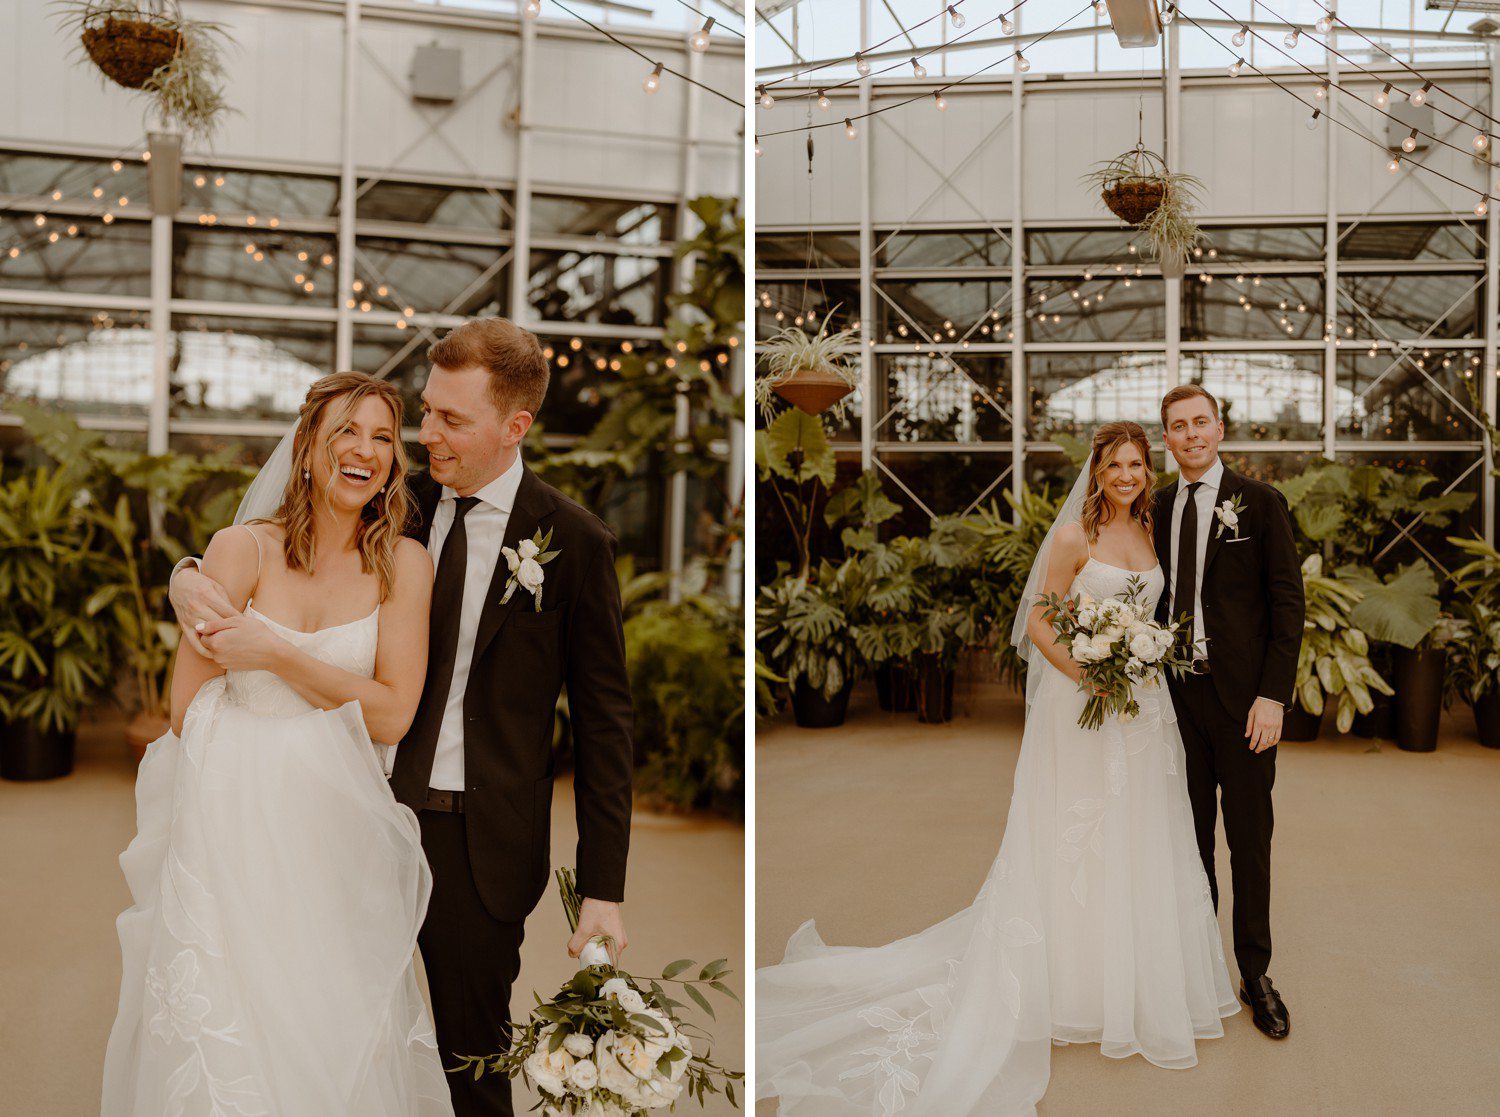 Greenhouse Wedding at The Downtown Market Grand Rapids